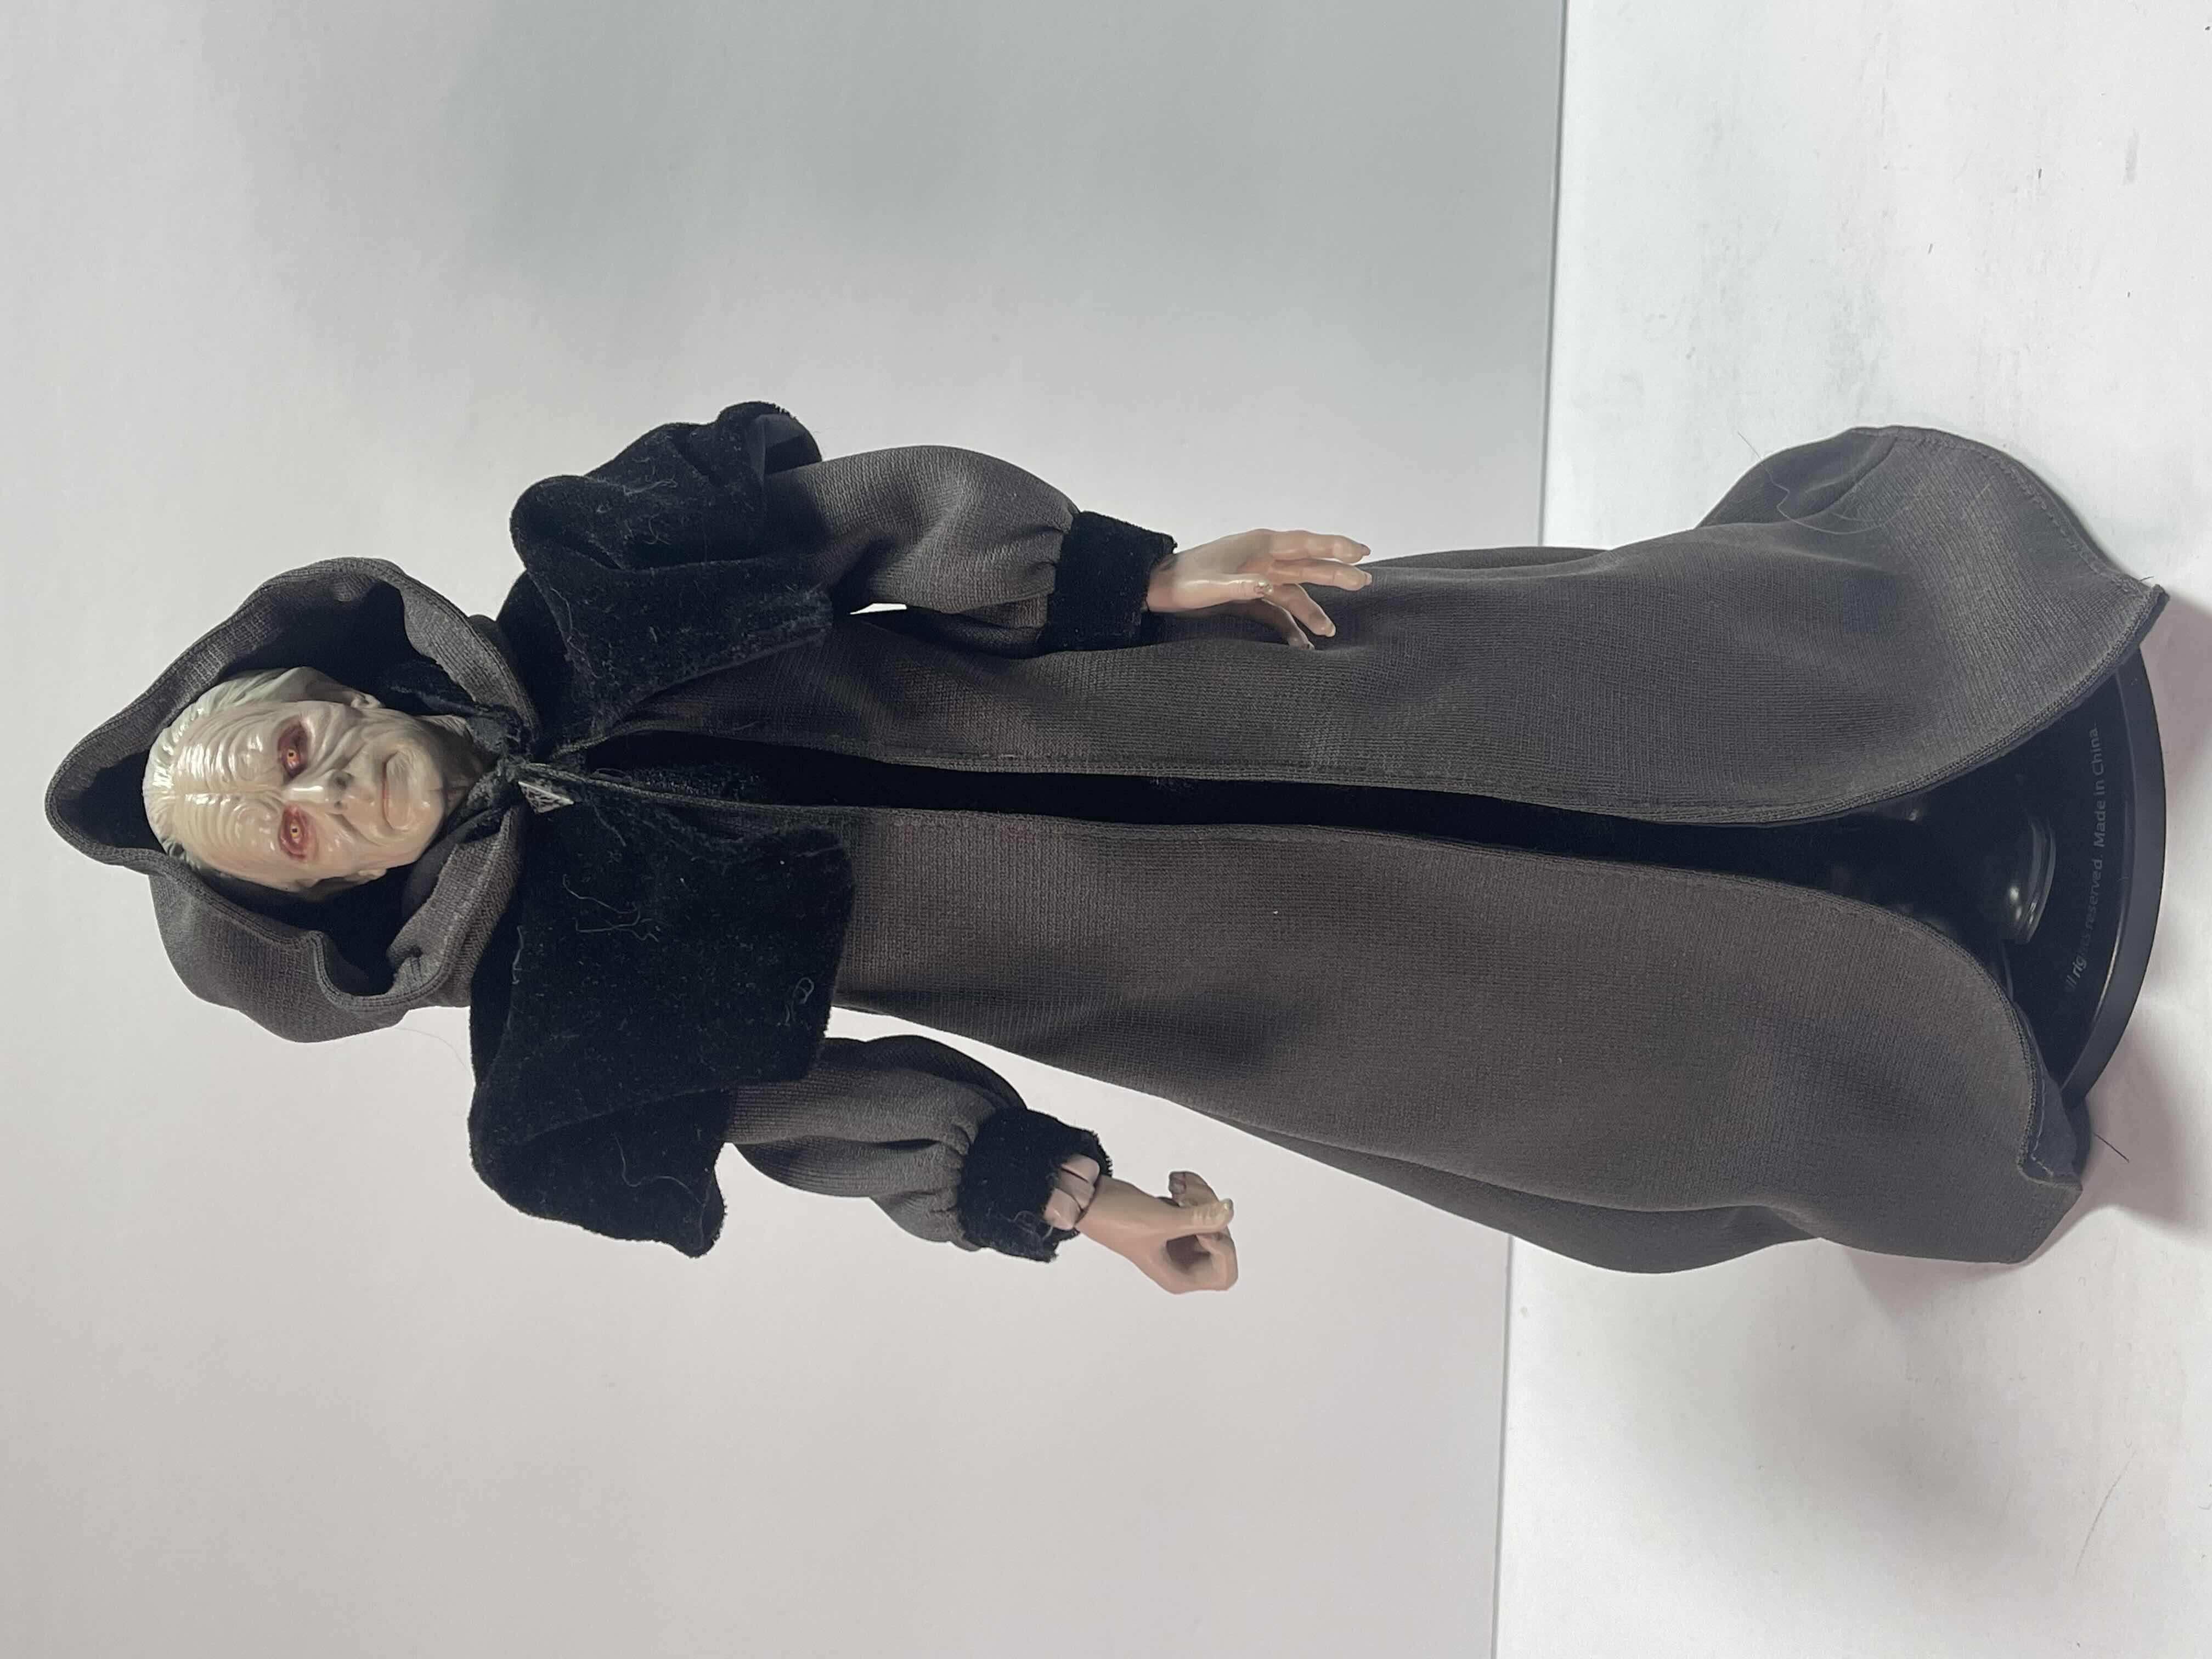 Photo 1 of STAR WARS PALAPATINE SIDESHOW DARTH SIDIOUS COLLECTABLE FIGURE - RETAIL VALUE- $350 - SEE NOTES FOR MORE INFORMATION